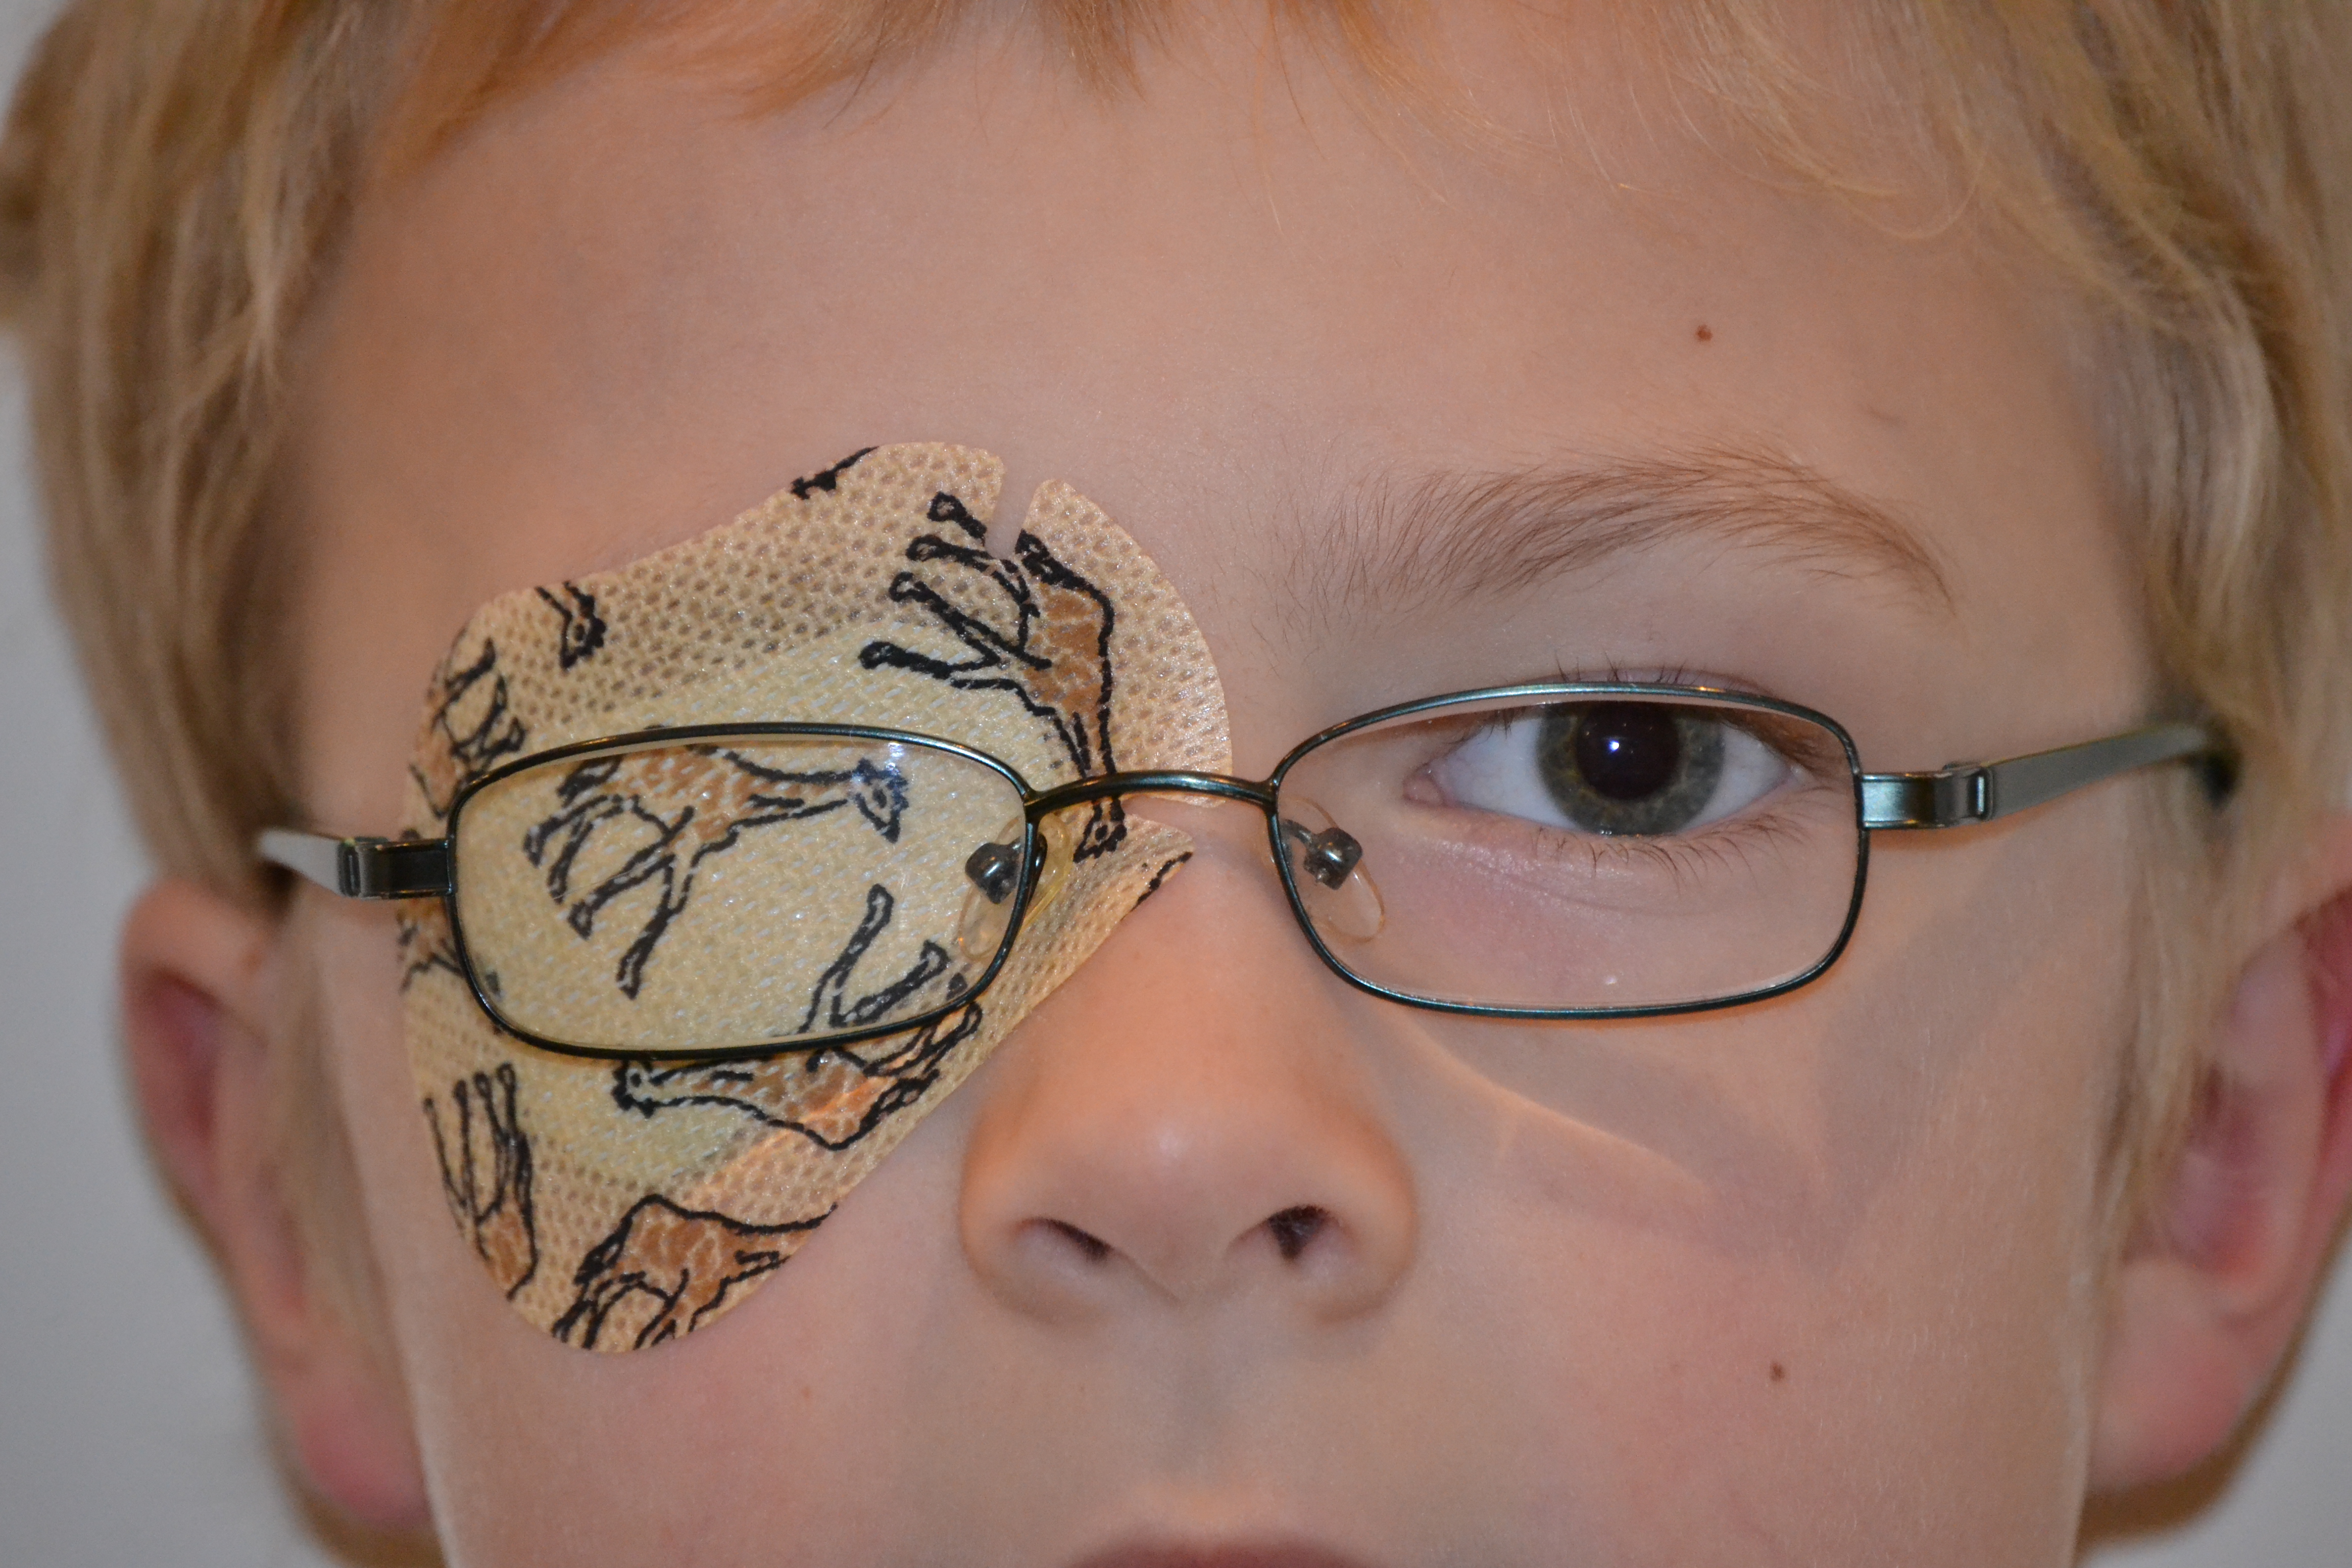 A young child wearing glasses, and a patch with drawings of giraffes on